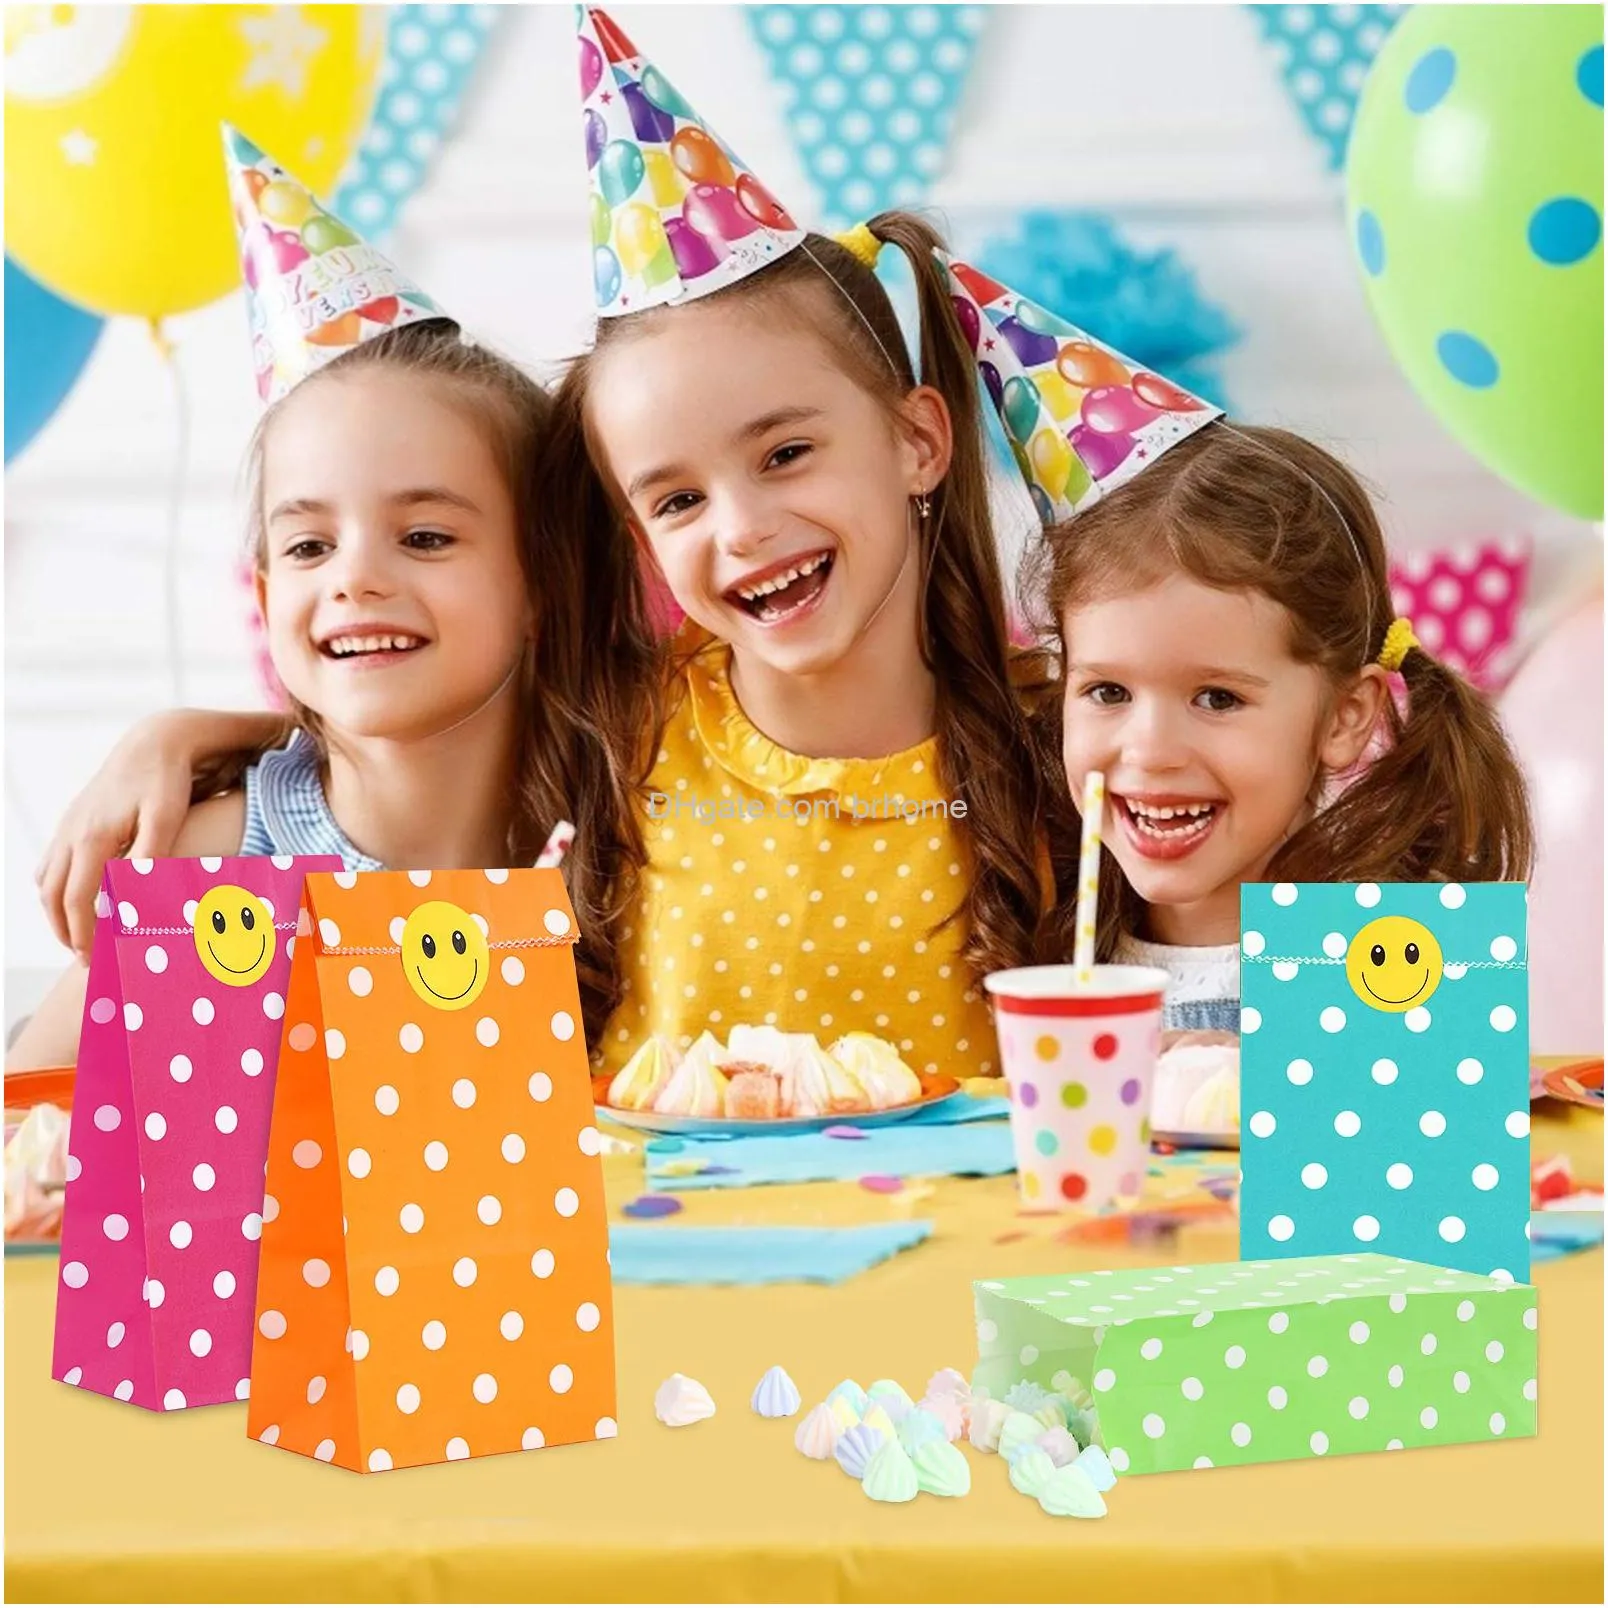 kraft paper party favor bags small gifts bags with stickers goodies bags for birthday baby shower wedding and more 3.54 x 2.16 x 7.28 inches